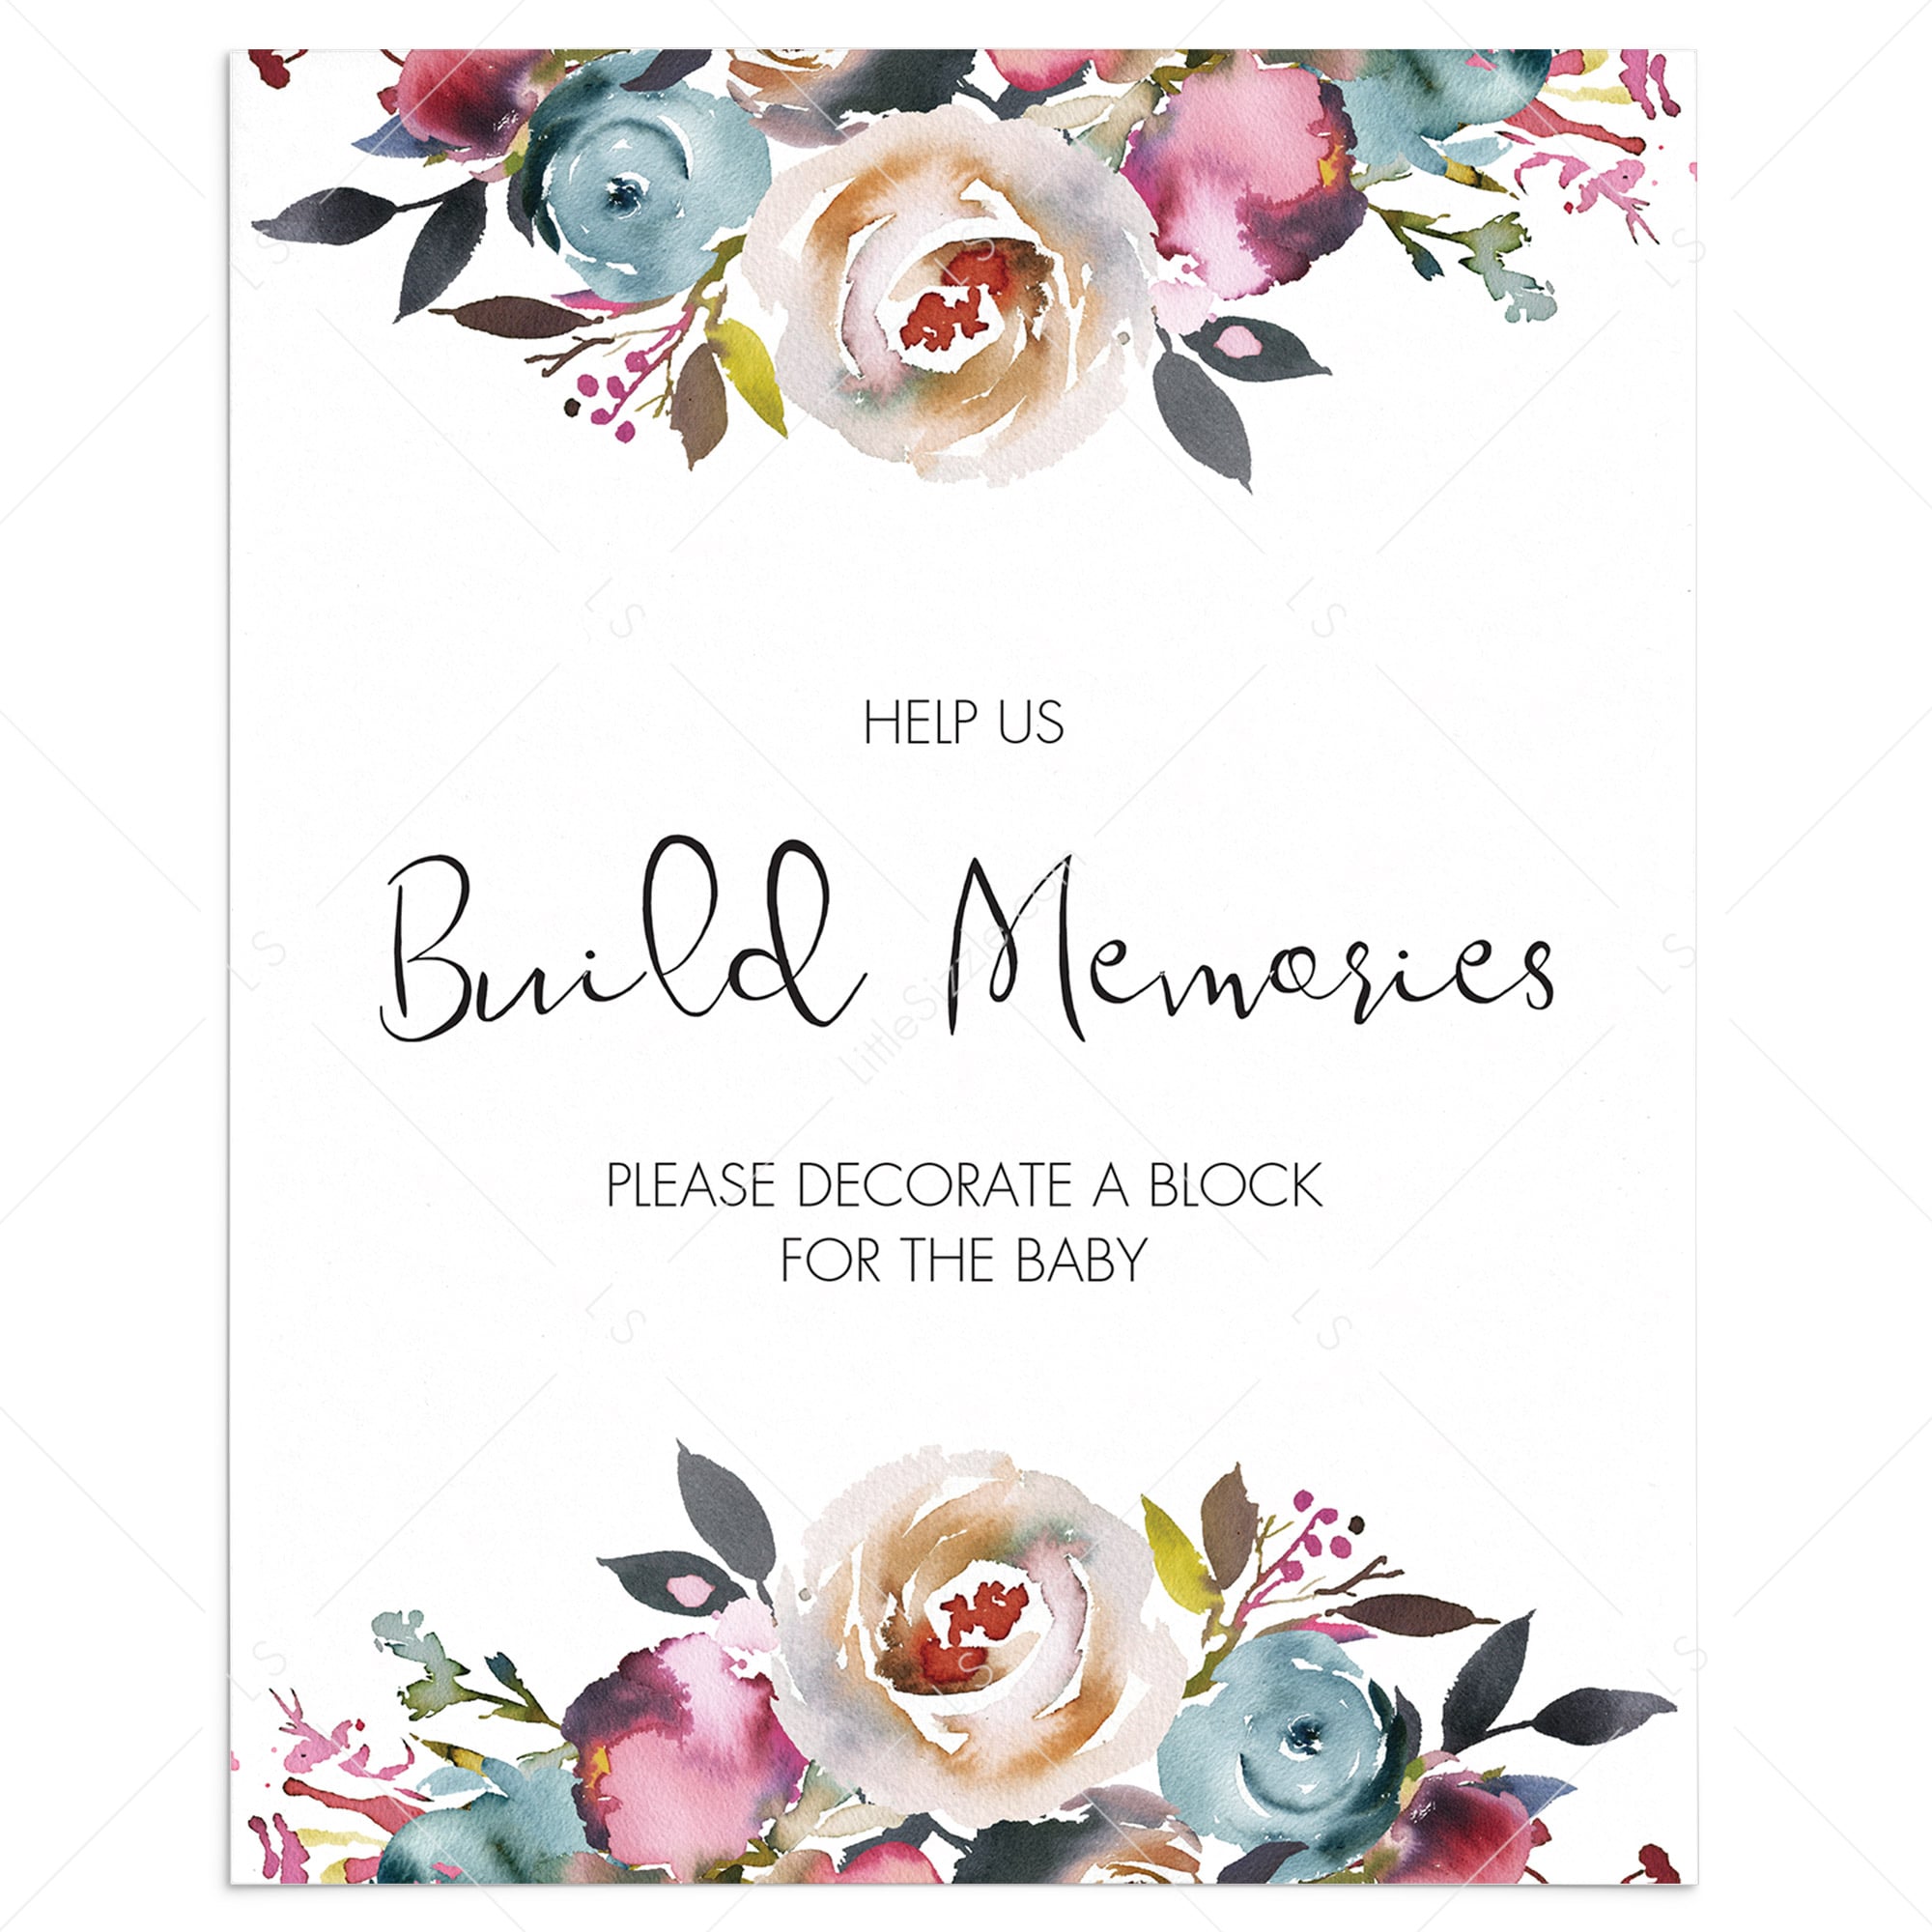 Build memories baby shower game decorate a block by LittleSizzle